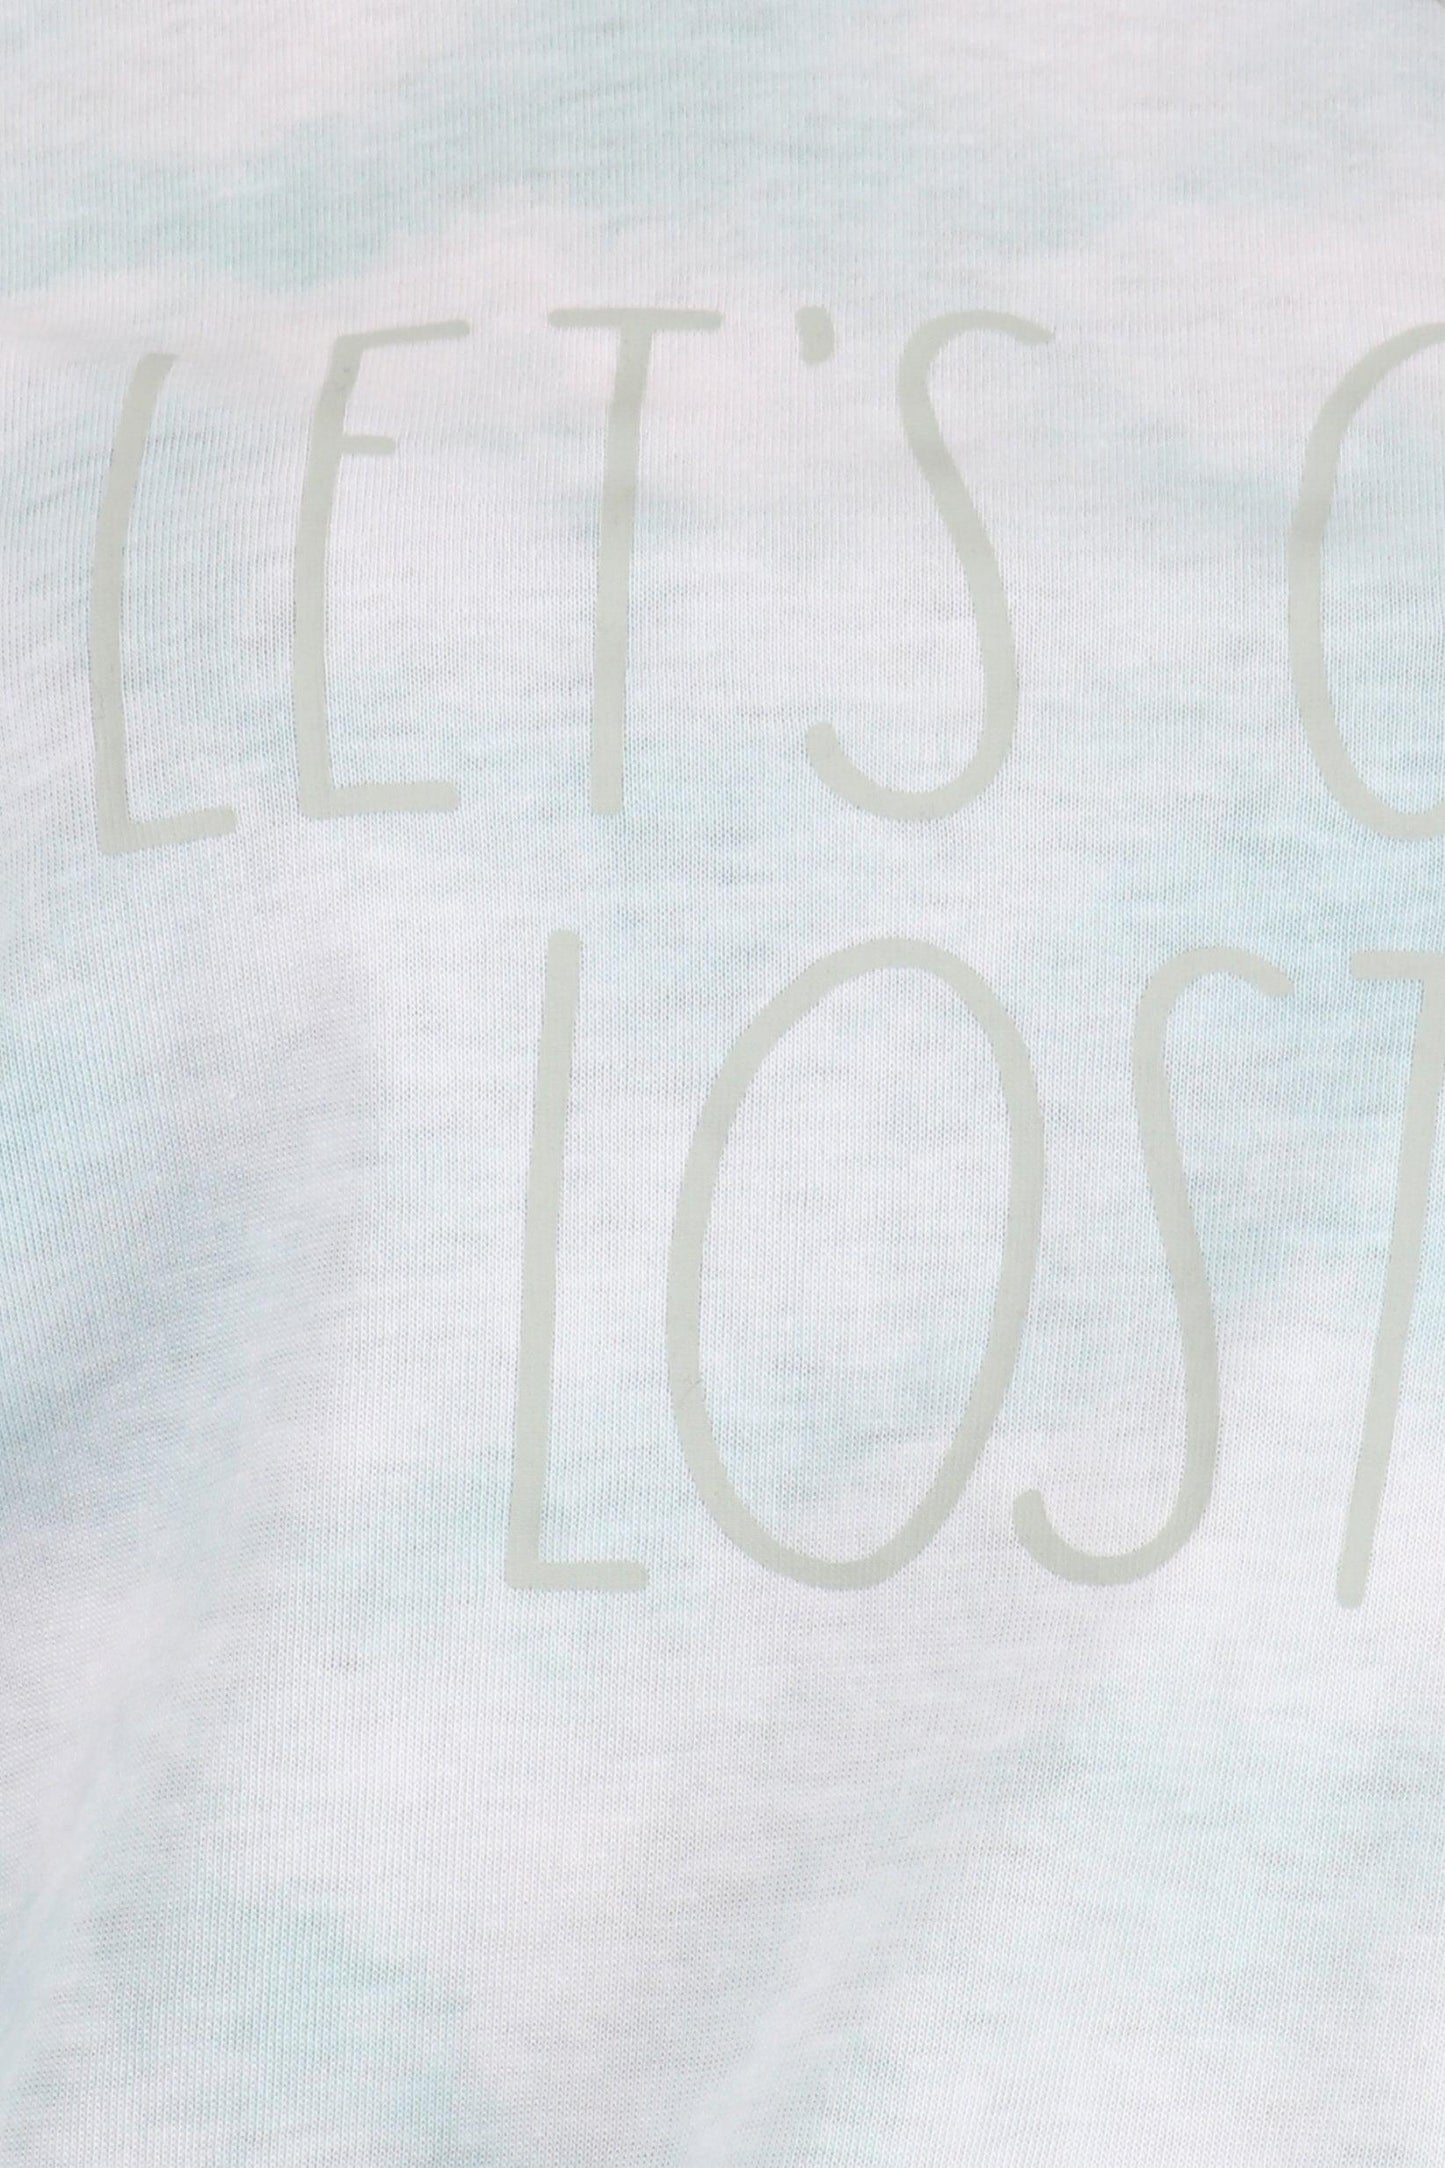 Women's "LET'S GET LOST" Short Sleeve Icon T-Shirt - Shop Rae Dunn Apparel and Sleepwear